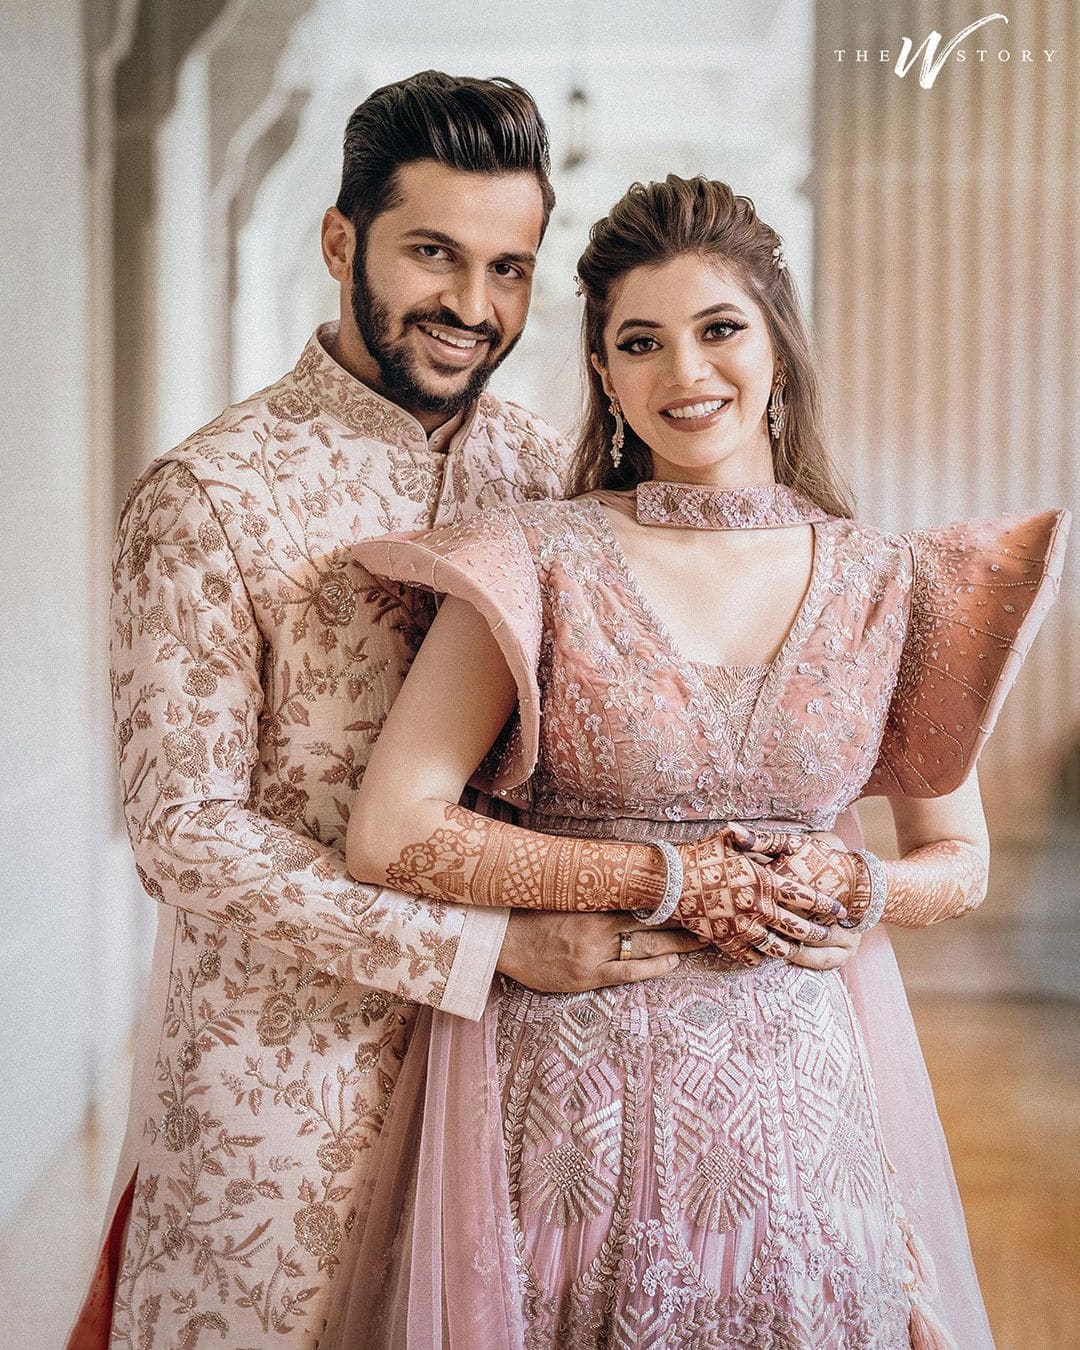 Shardul Thakur is engaged to his girlfriend